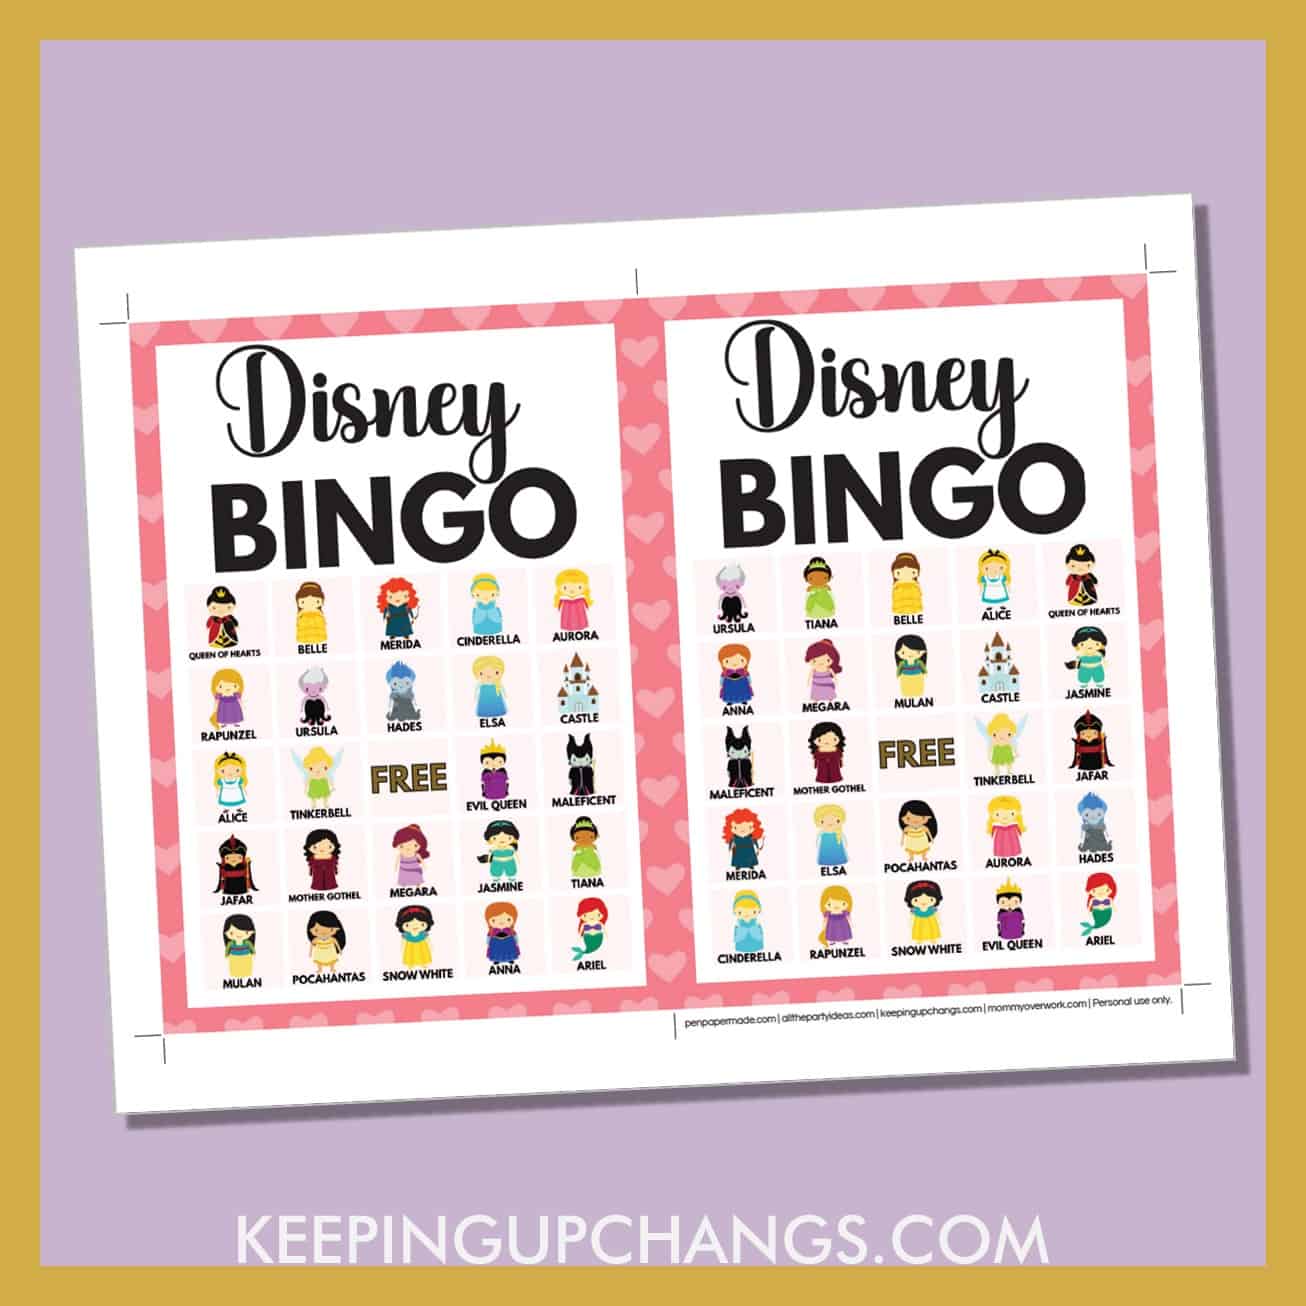 free disney princess bingo card 5x5 5x7 game boards with images and text words.